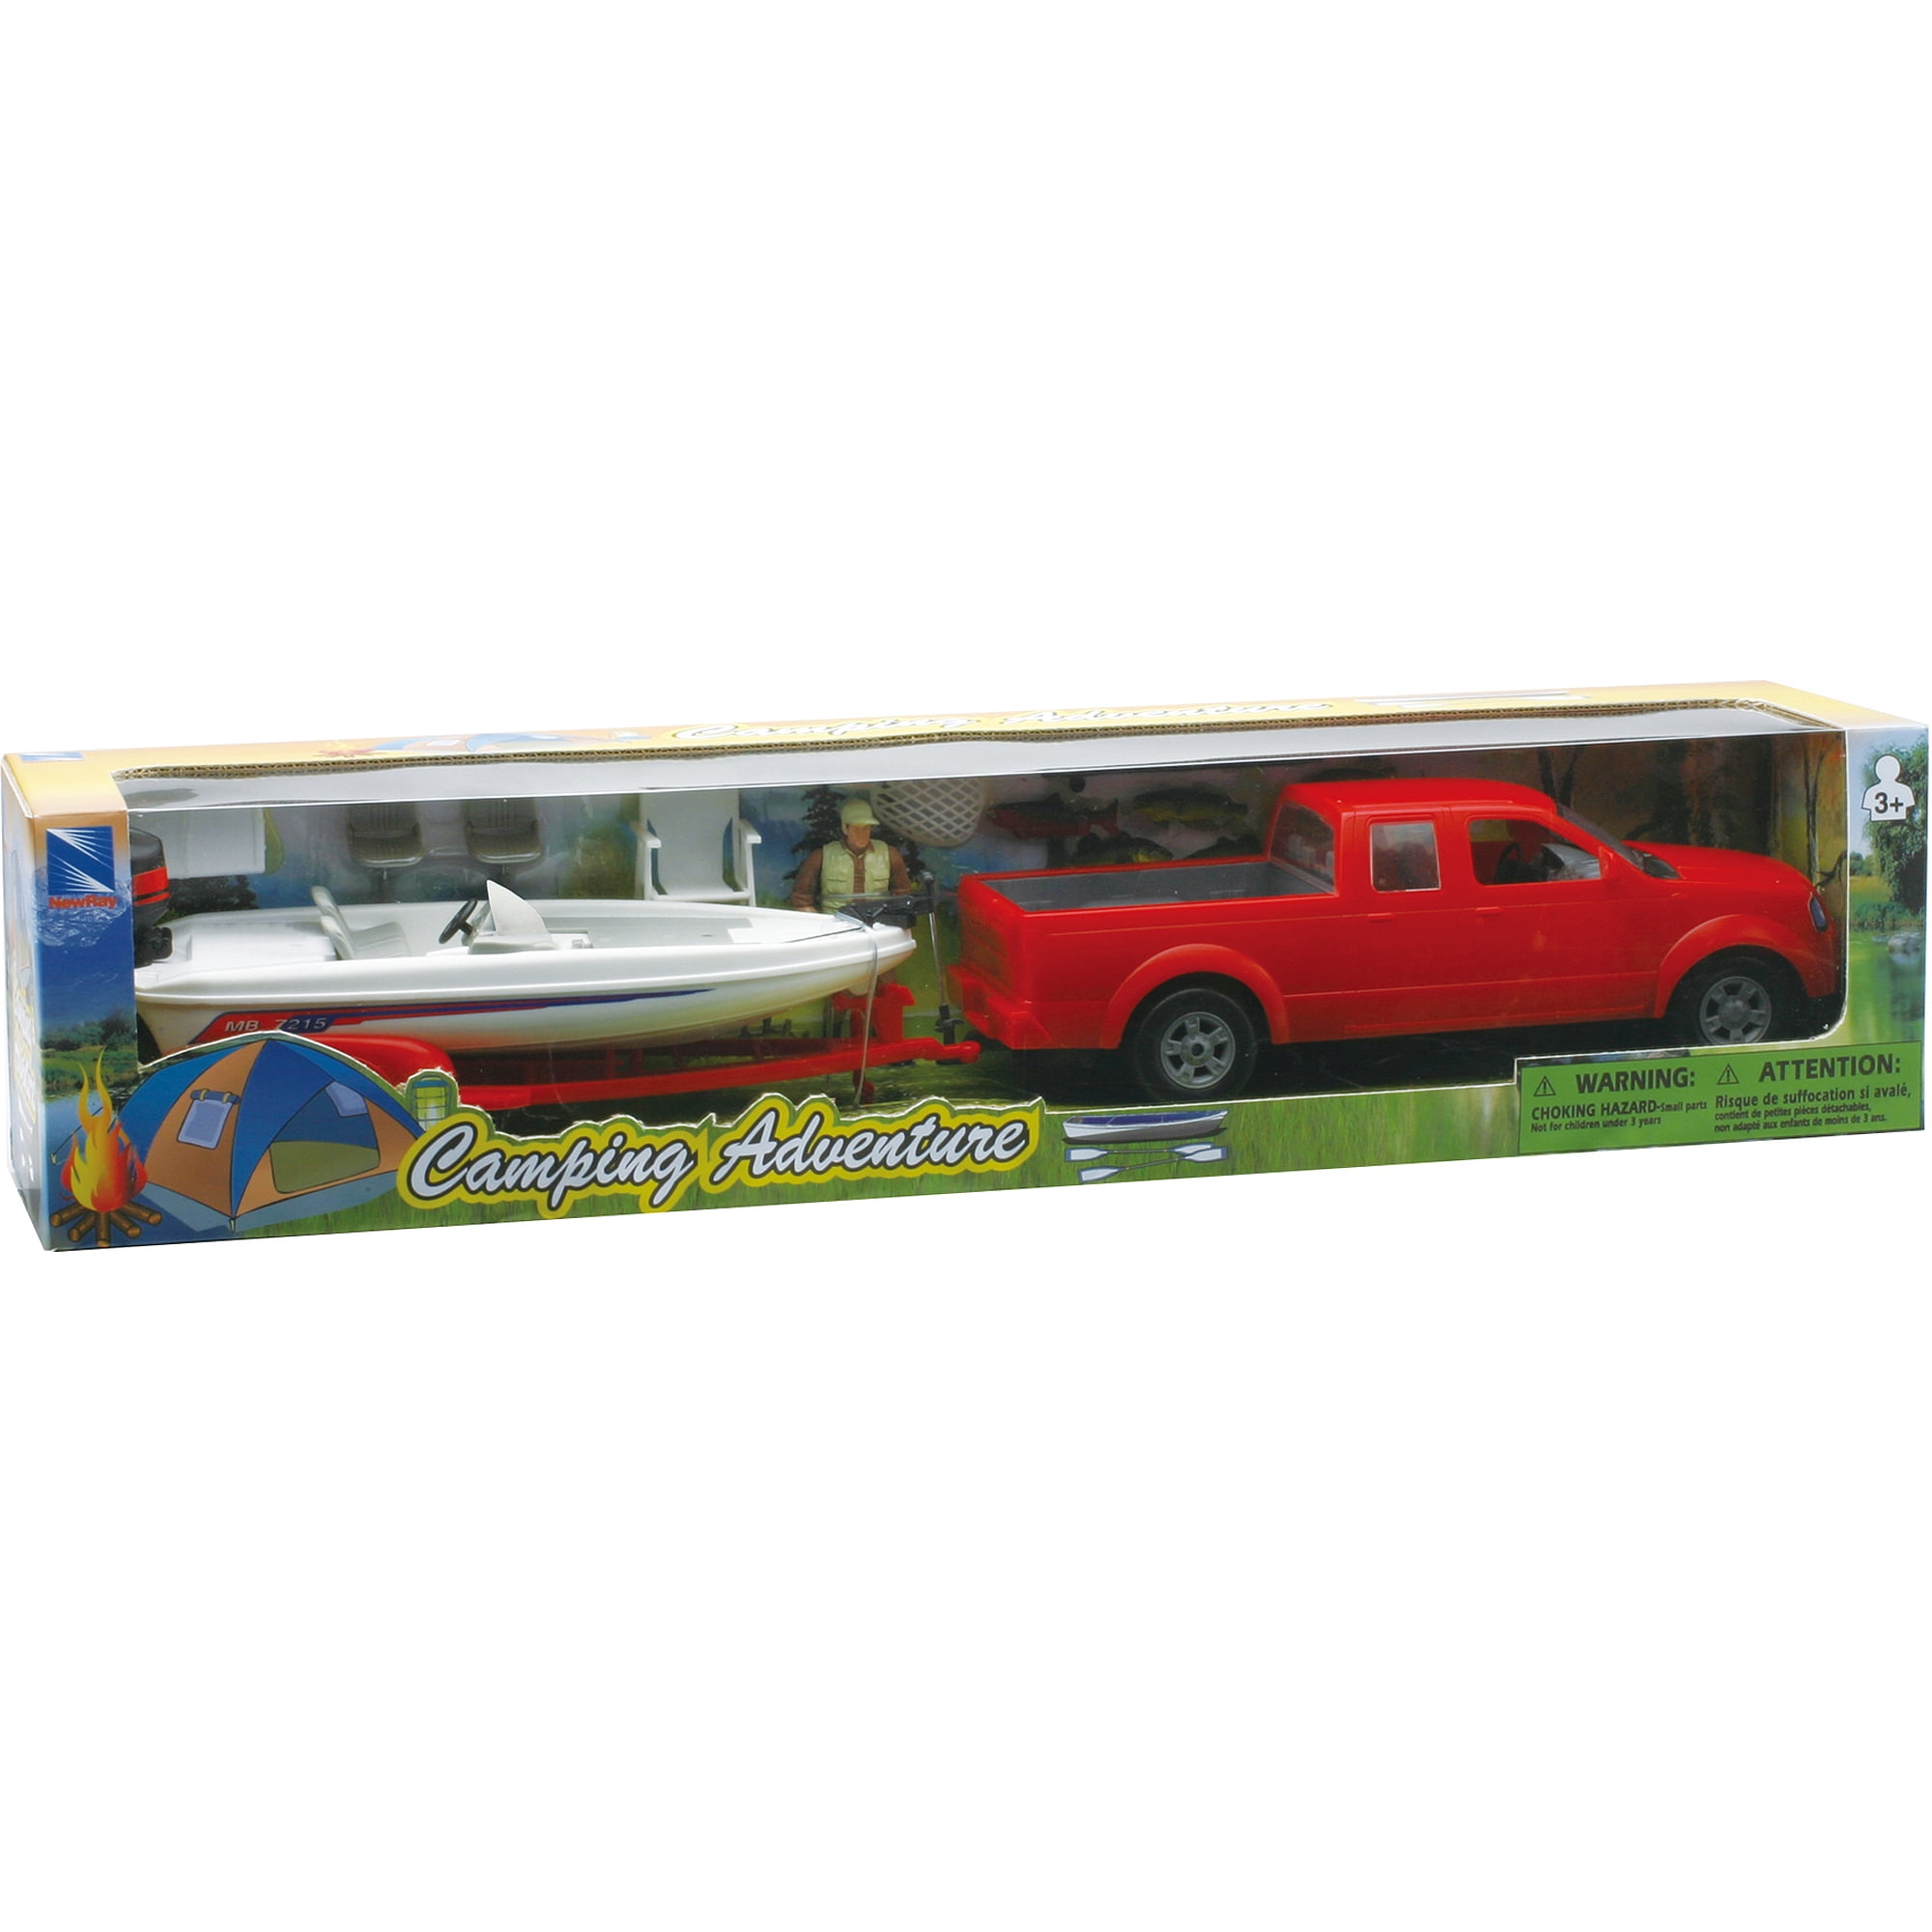 toy truck and trailer with boat